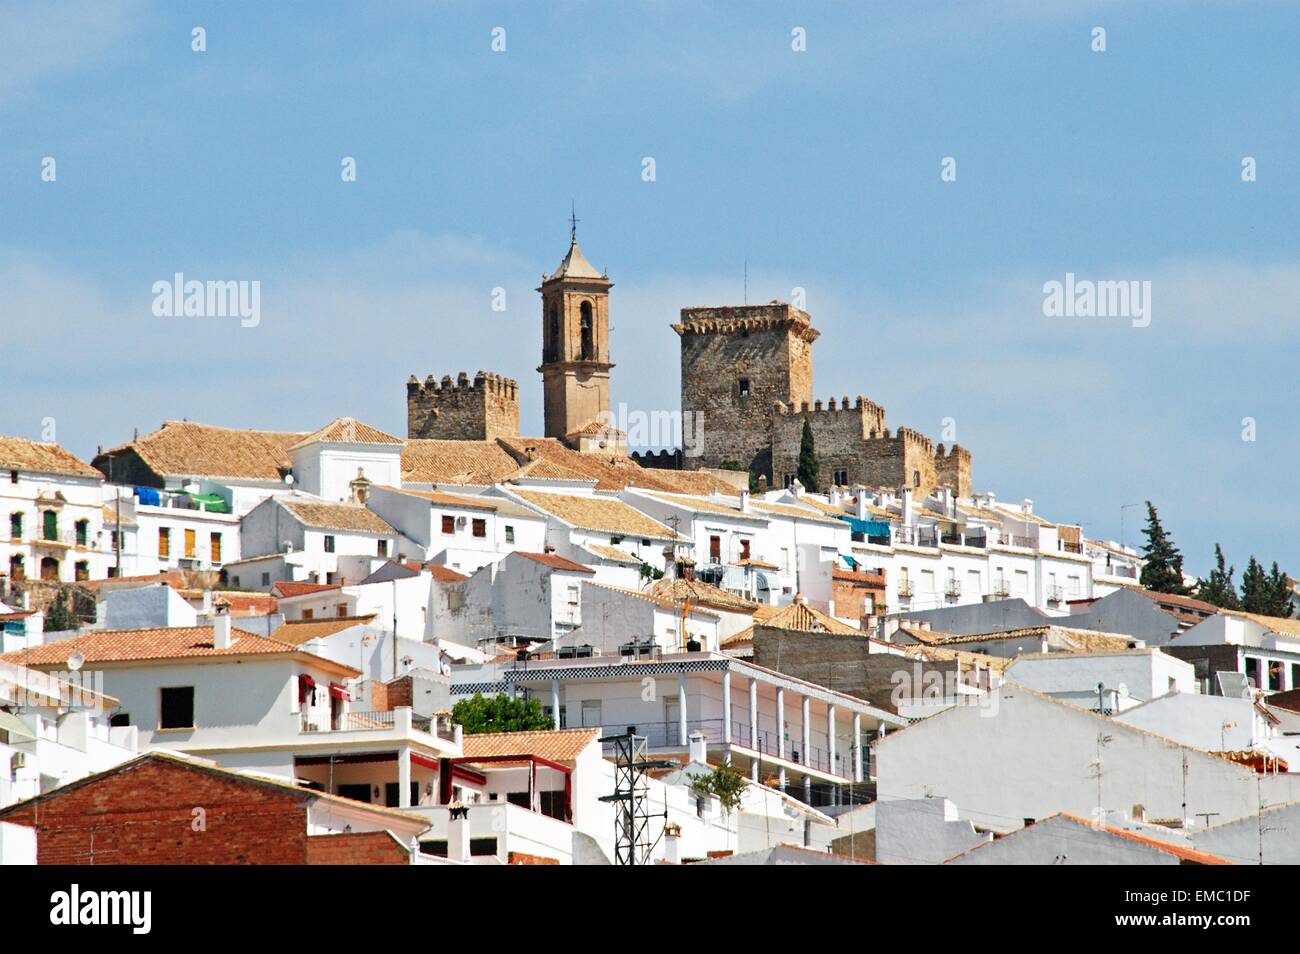 General view of town with church and castle on hill, Espejo, Cordoba Province, Andalusia, Spain, Western Europe. Stock Photo